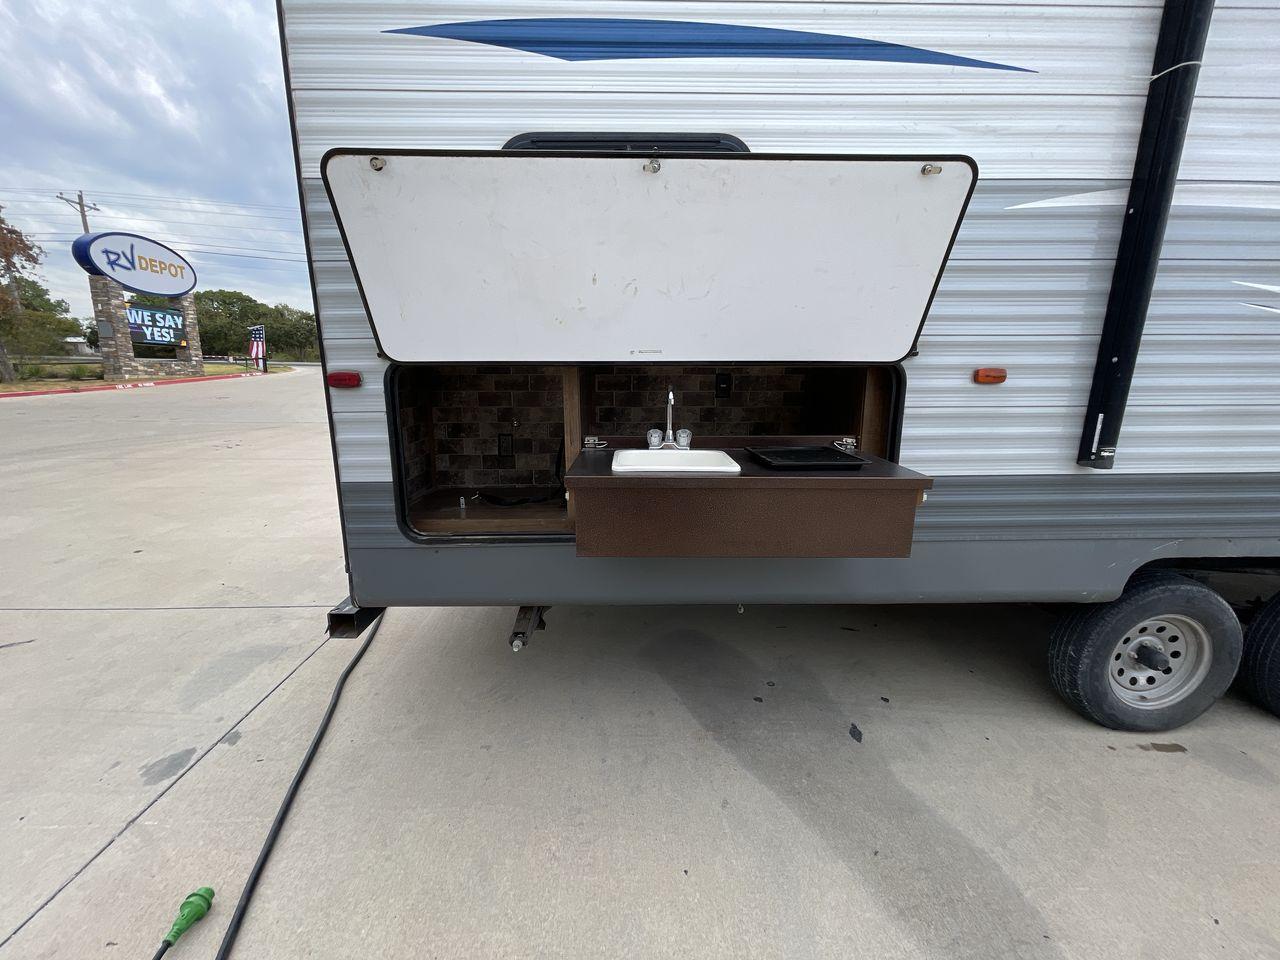 2018 GRAY KINGSPORT 301TB (1NL1GTS2XJ1) , Length: 33.58 ft. | Dry Weight: 6,845 lbs. | Slides: 1 transmission, located at 4319 N Main St, Cleburne, TX, 76033, (817) 678-5133, 32.385960, -97.391212 - The 2018 Kingsport 301TB travel trailer will help you prepare for your next vacation. This well-thought-out, kid-friendly RV is your ticket to enjoyable and unique camping trips. The dimensions of this unit are 34.08 ft in length, 8 ft in width, and 10.75 ft in height. It has a dry weight of 6,845 l - Photo #20